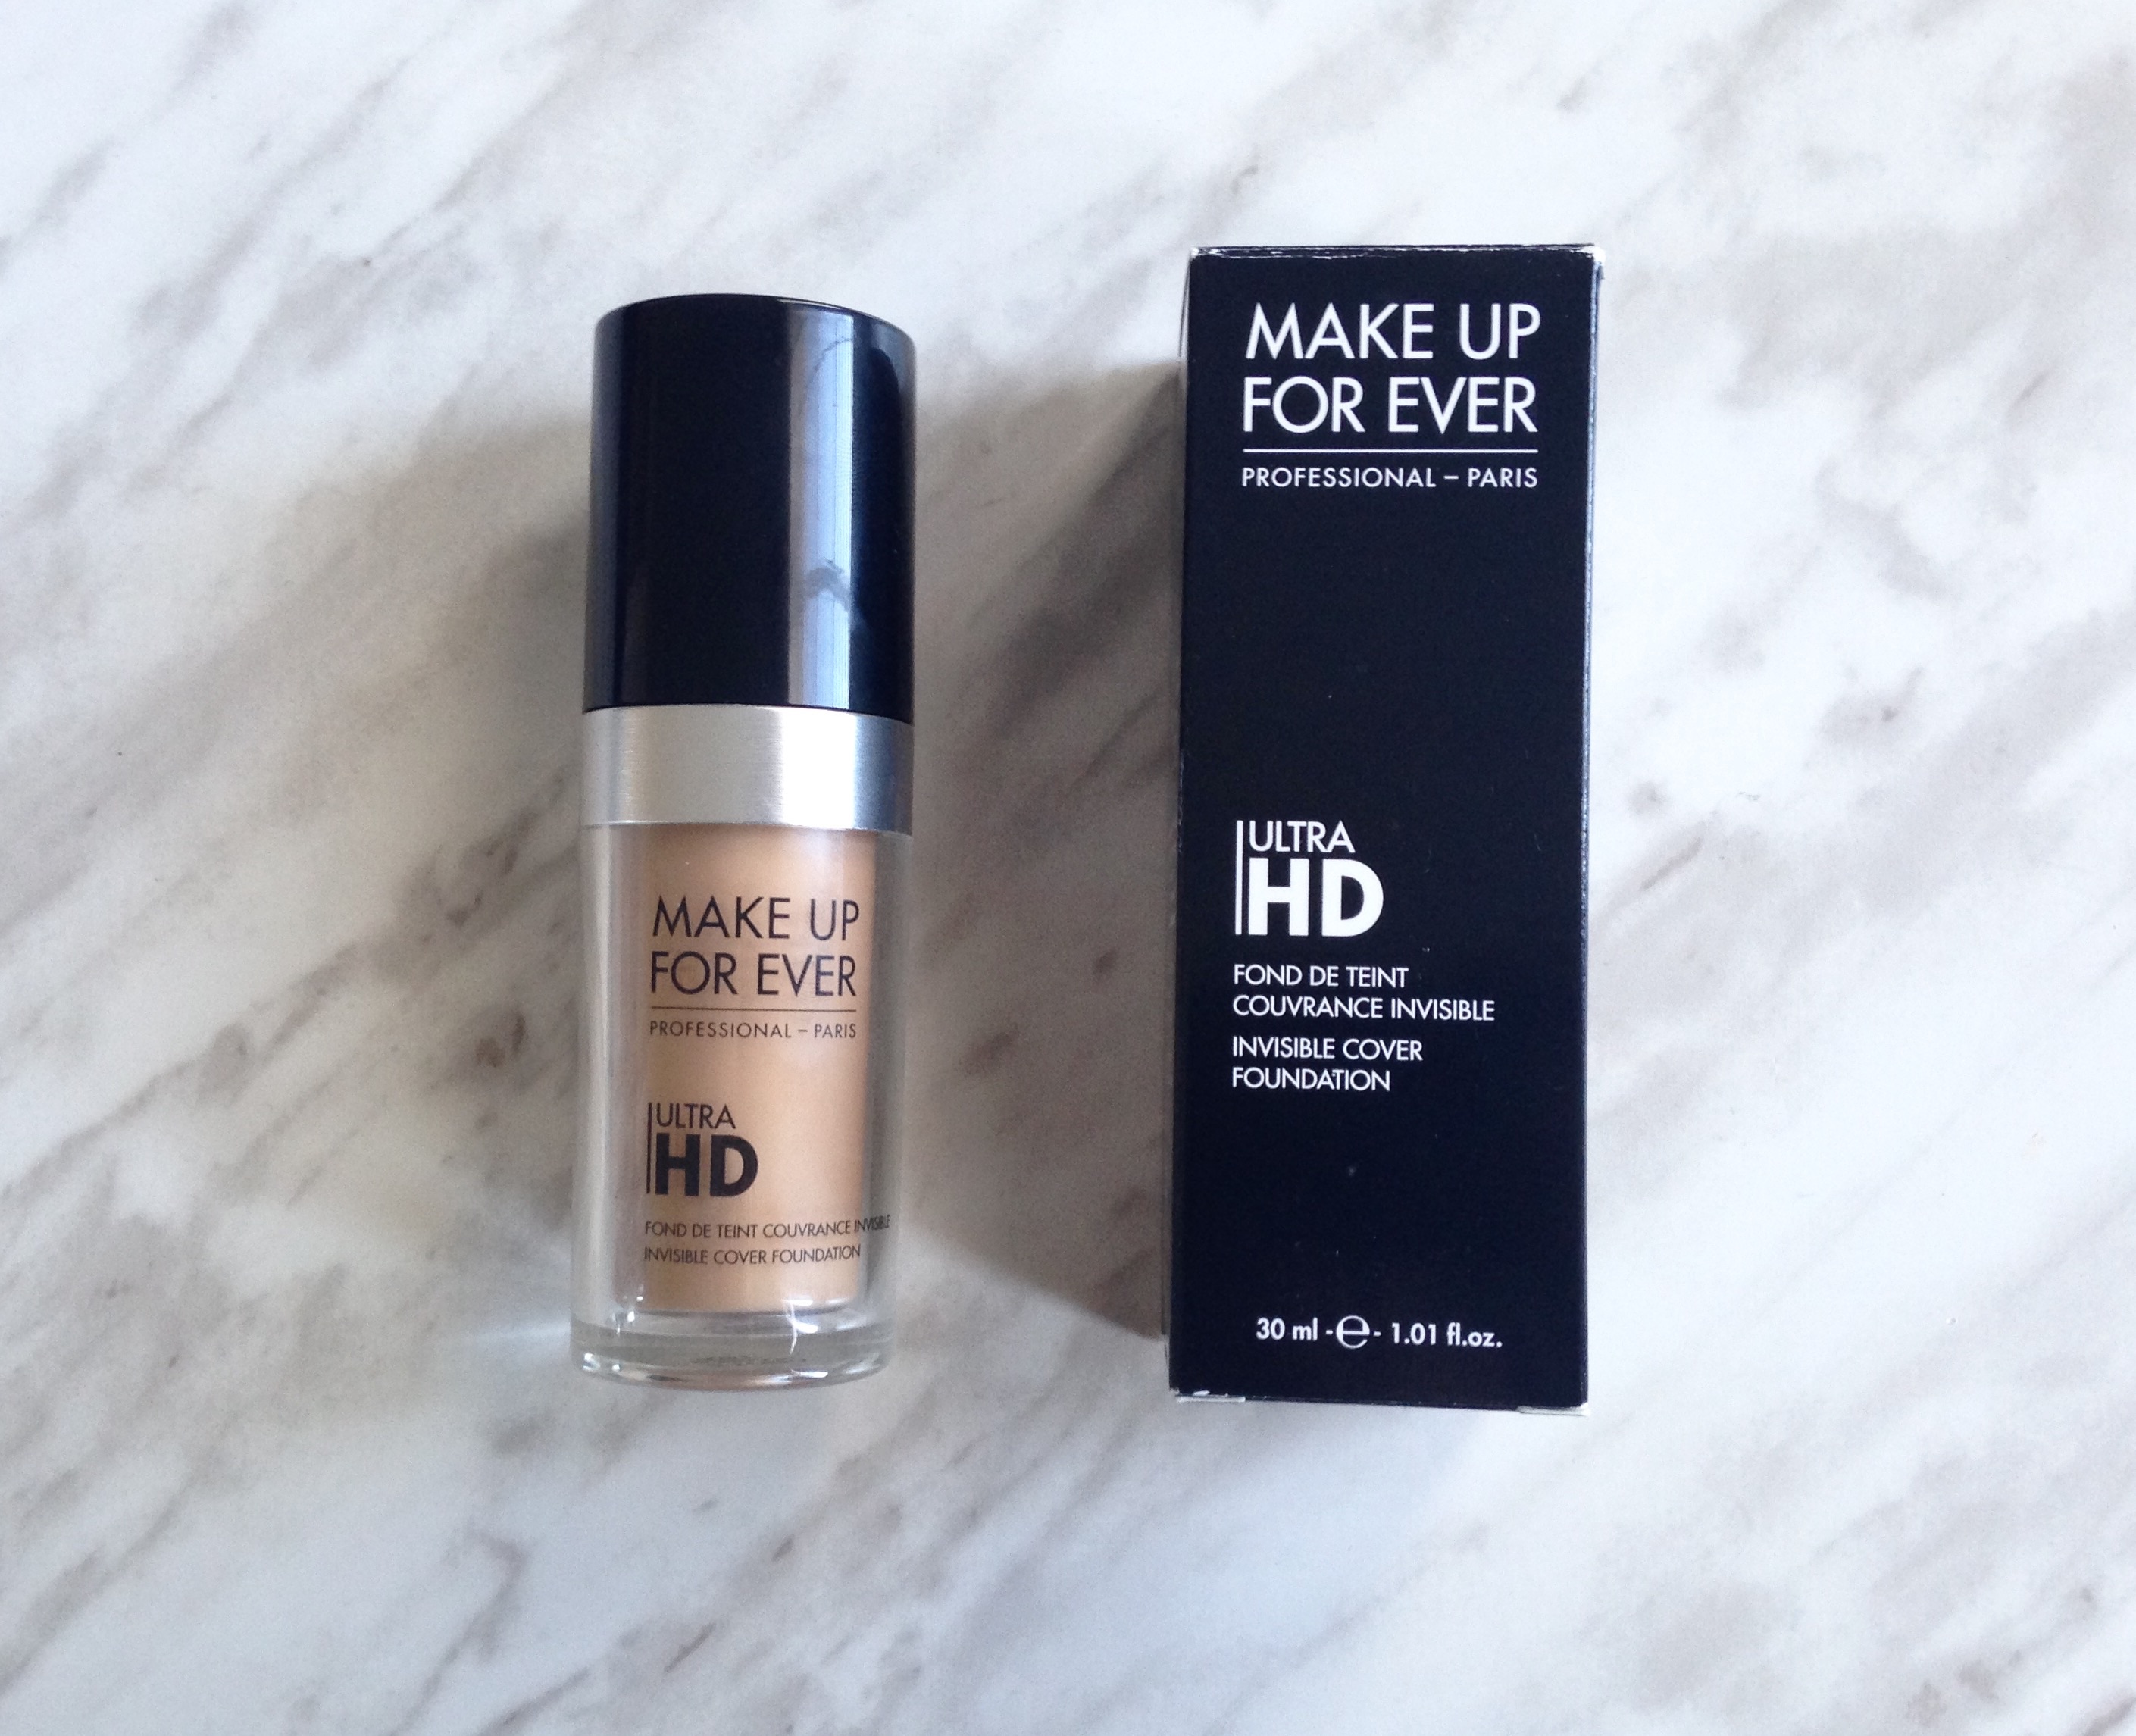 Make Up For Ever Ultra HD Foundation & Stick Foundation Coming Soon